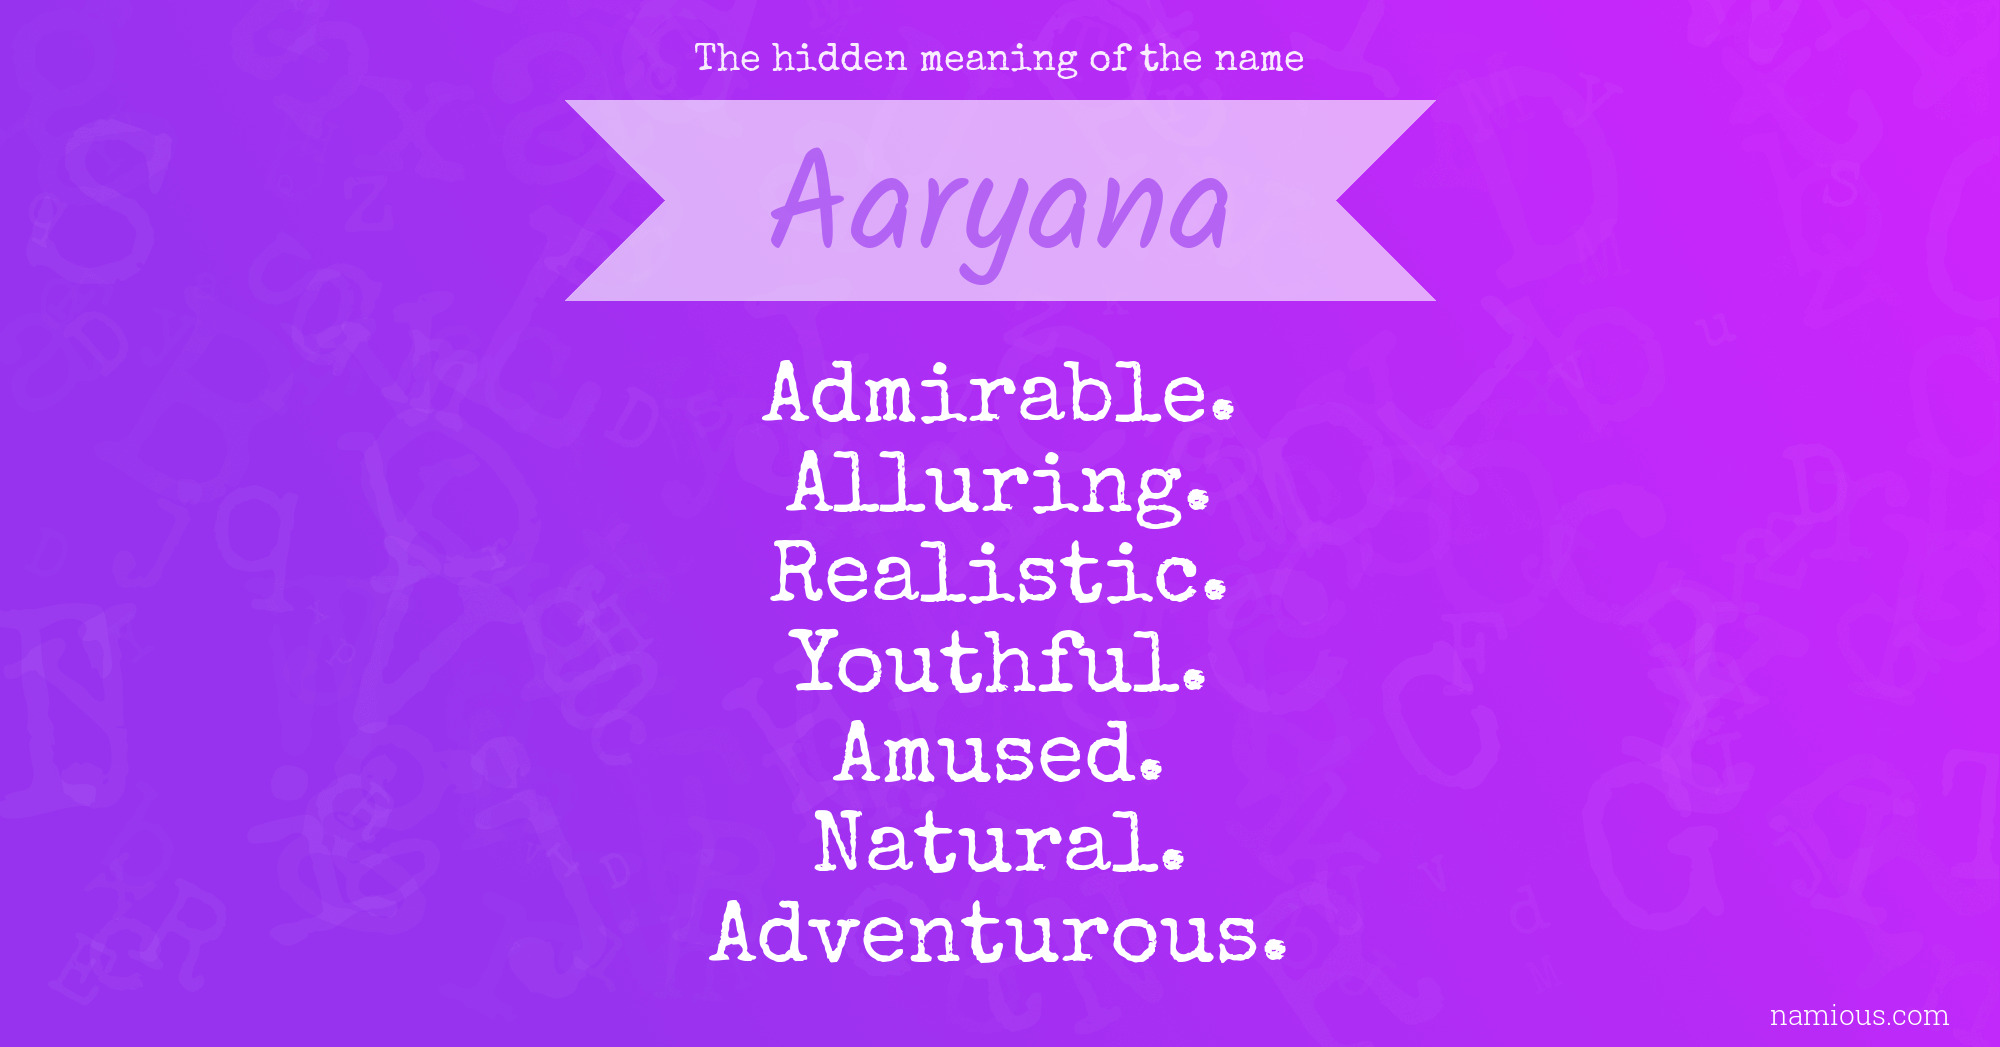 The hidden meaning of the name Aaryana